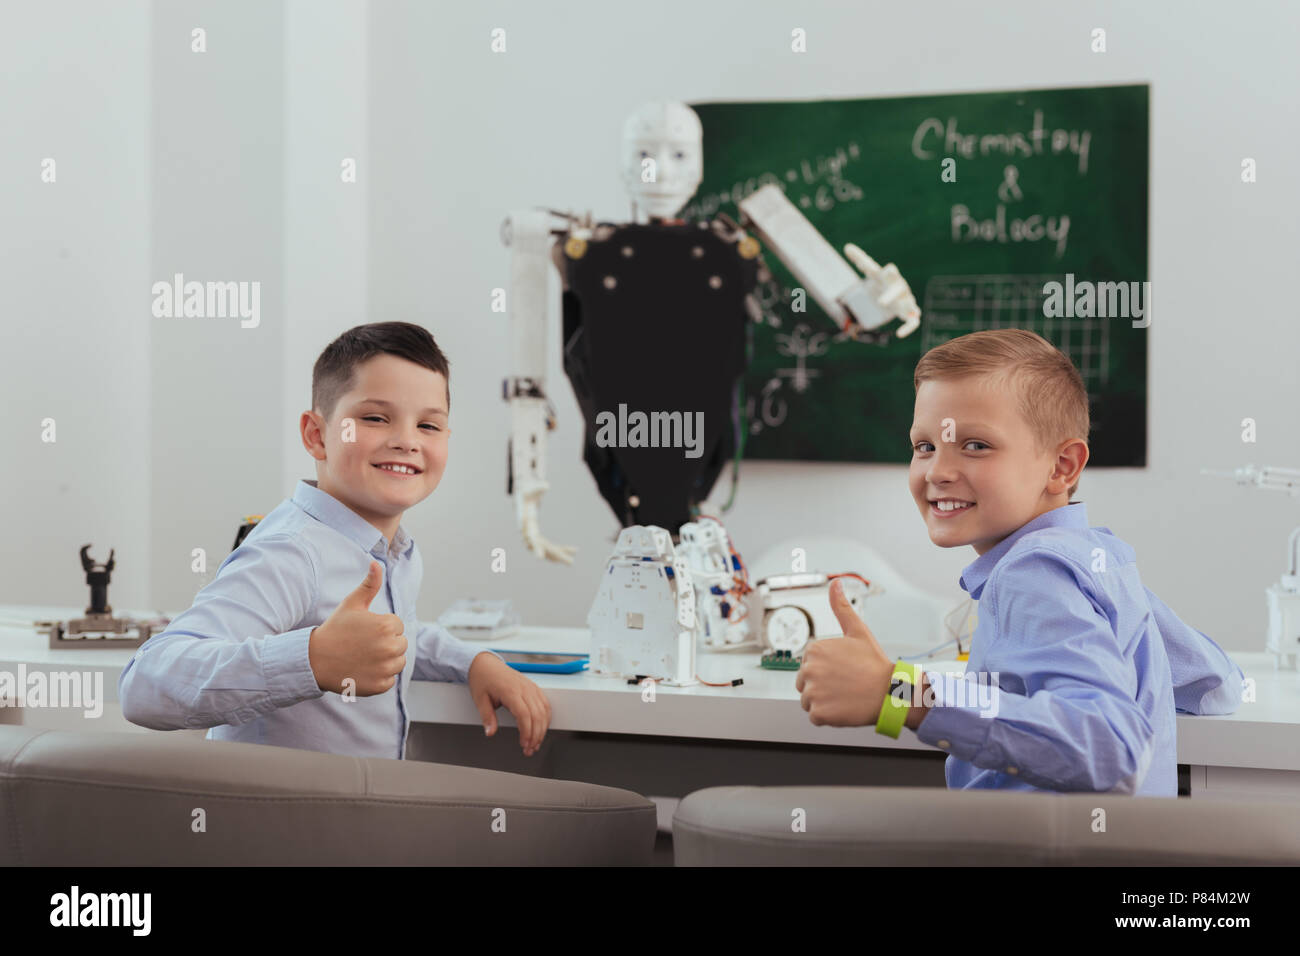 Happy positive boys showing Ok signs Stock Photo